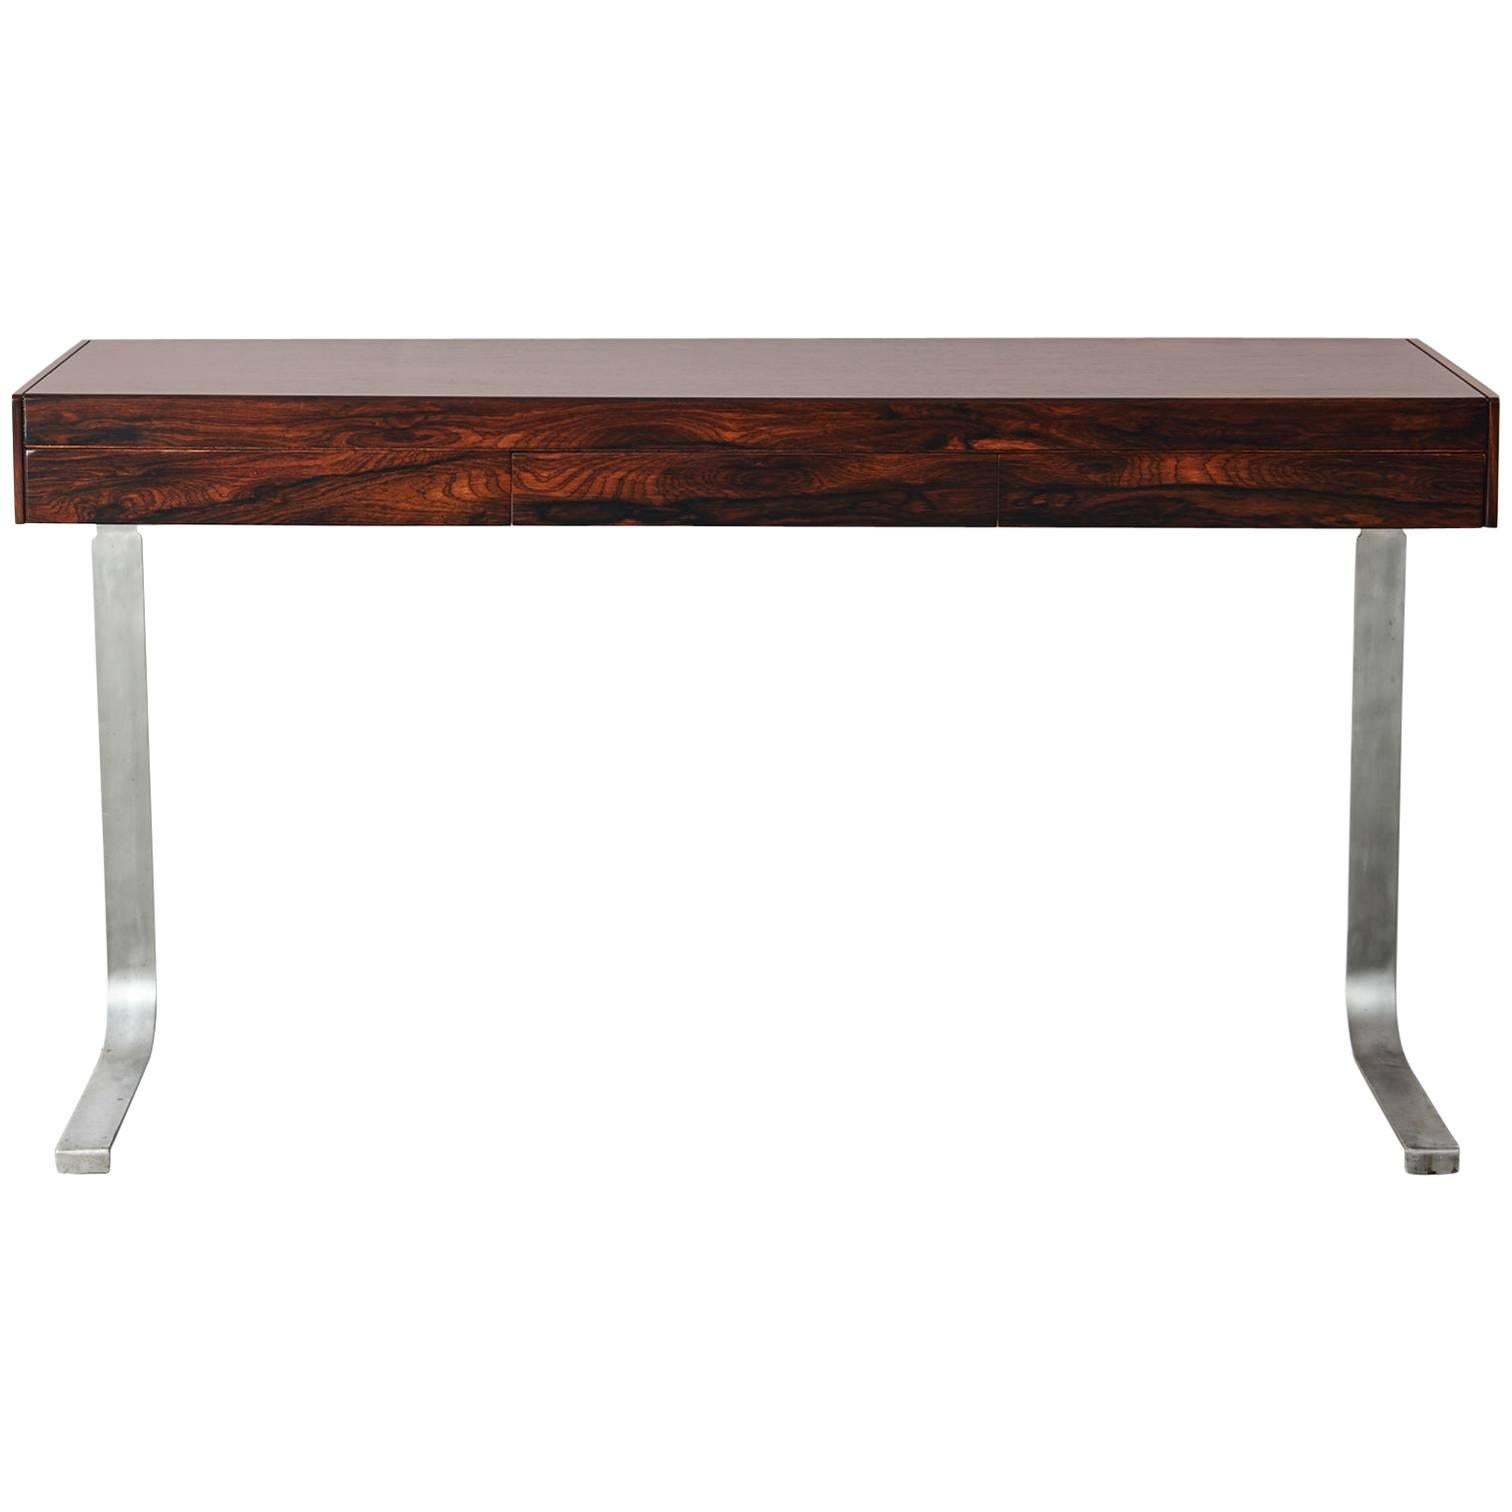 'Planar' Console Table by Robert Heritage